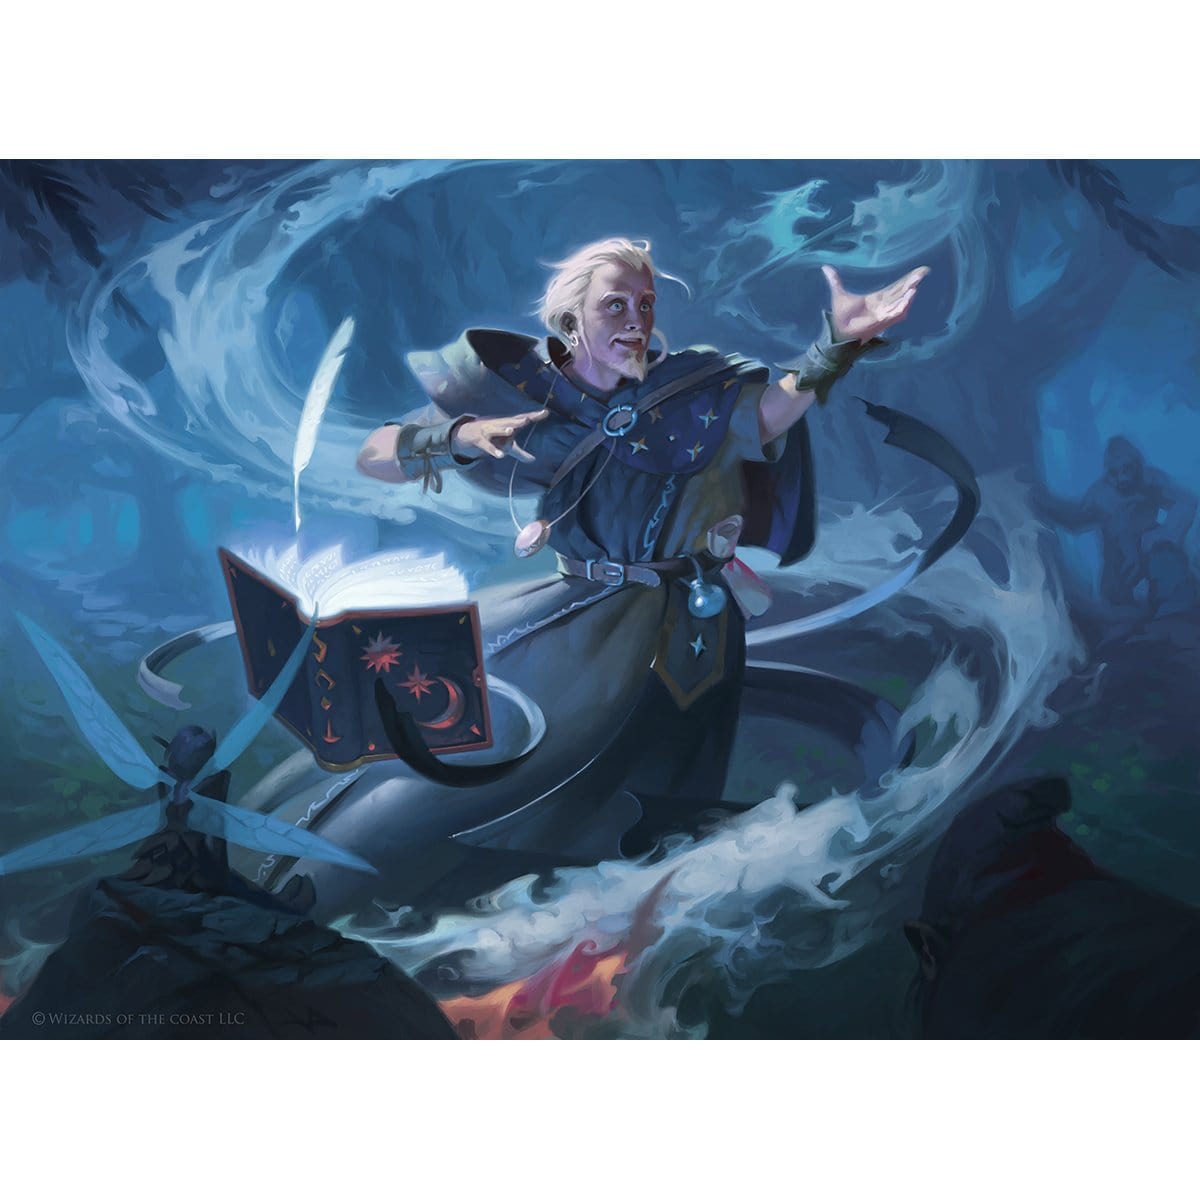 Chulane, Teller of Tales Print - Print - Original Magic Art - Accessories for Magic the Gathering and other card games